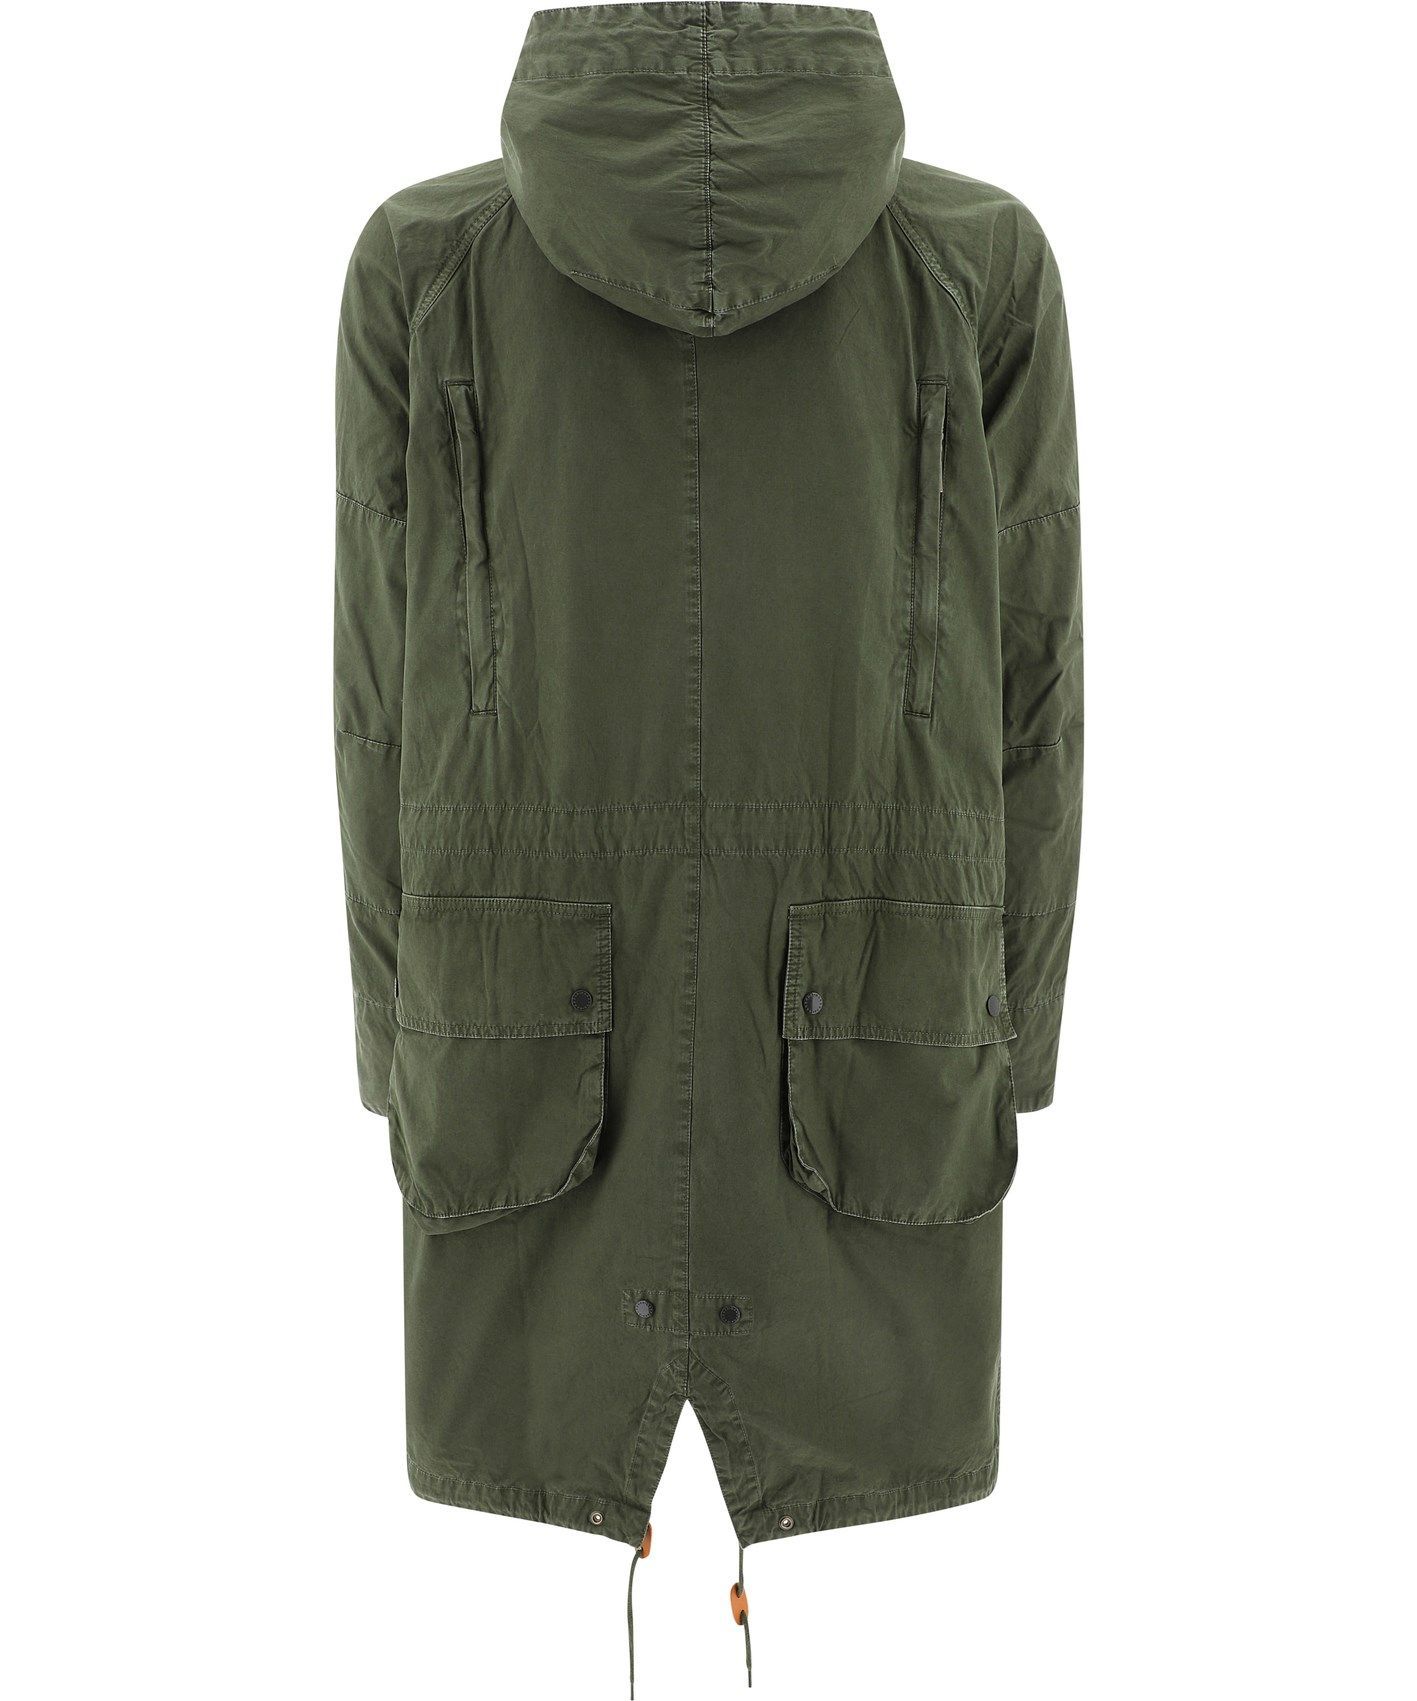 COAT BARBOUR, COTTON 100%, color GREEN, SS20, product code BACPS21570L52